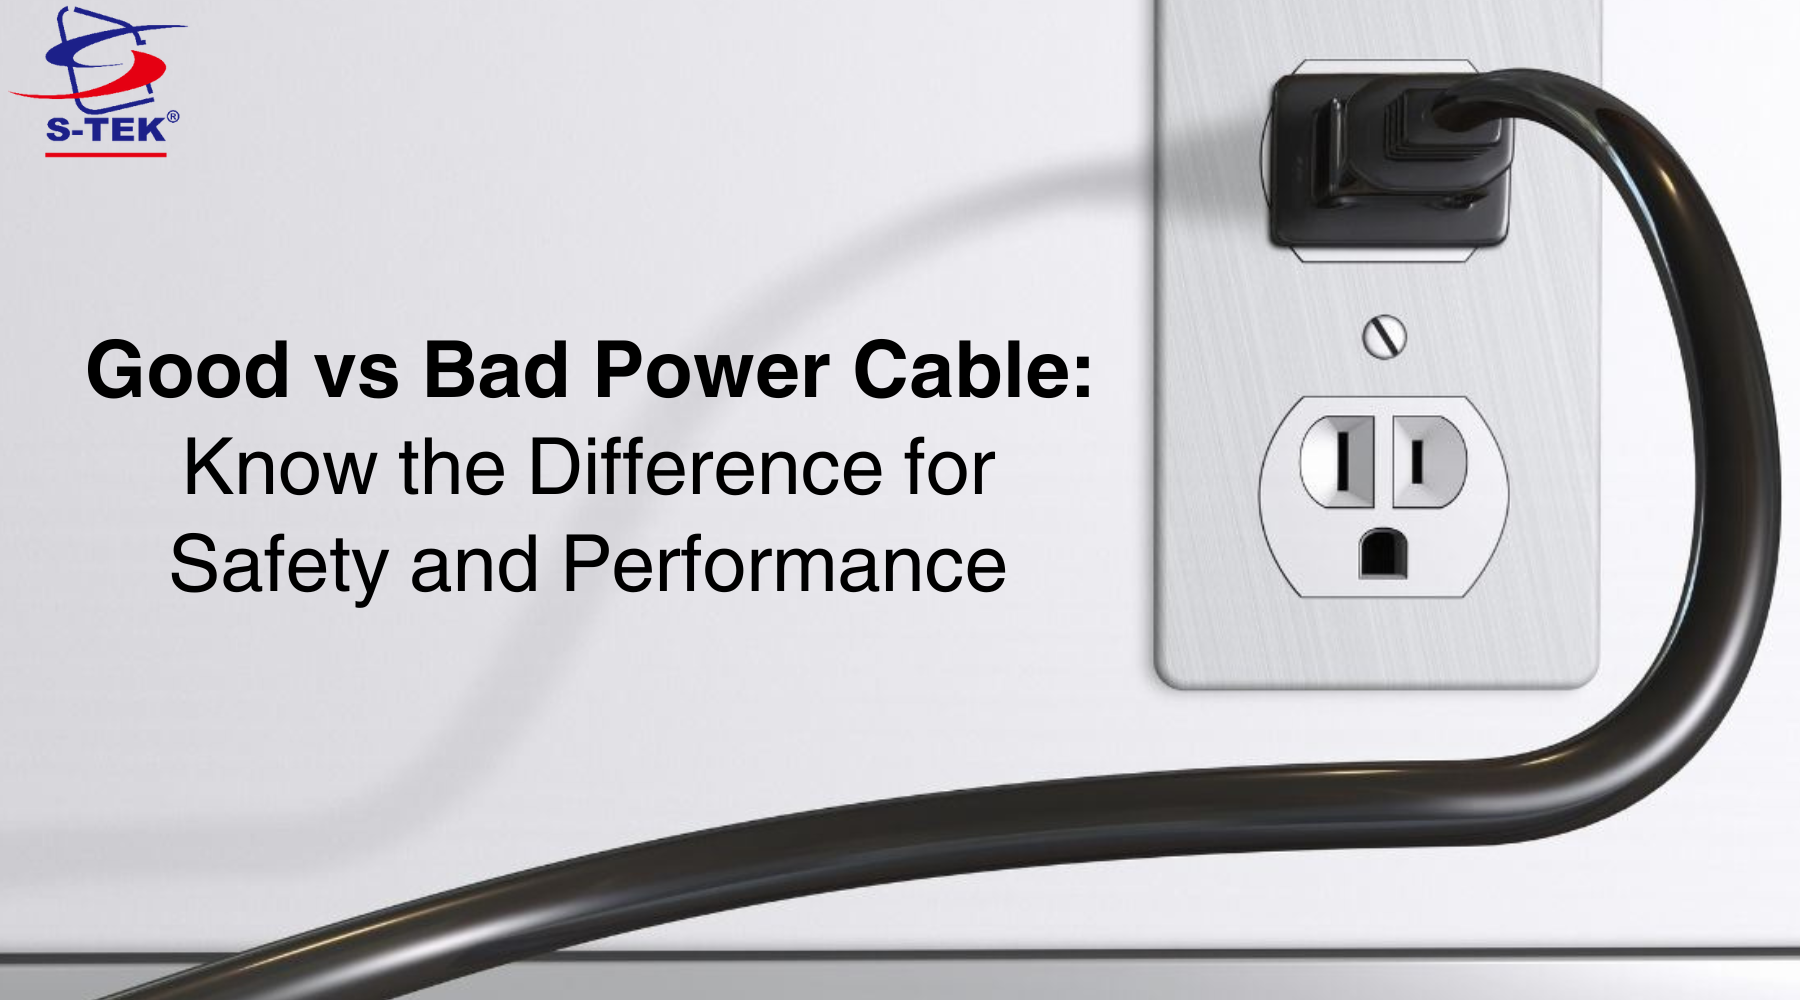 Good vs Bad Power Cables: Know the Difference for Safety and Performance